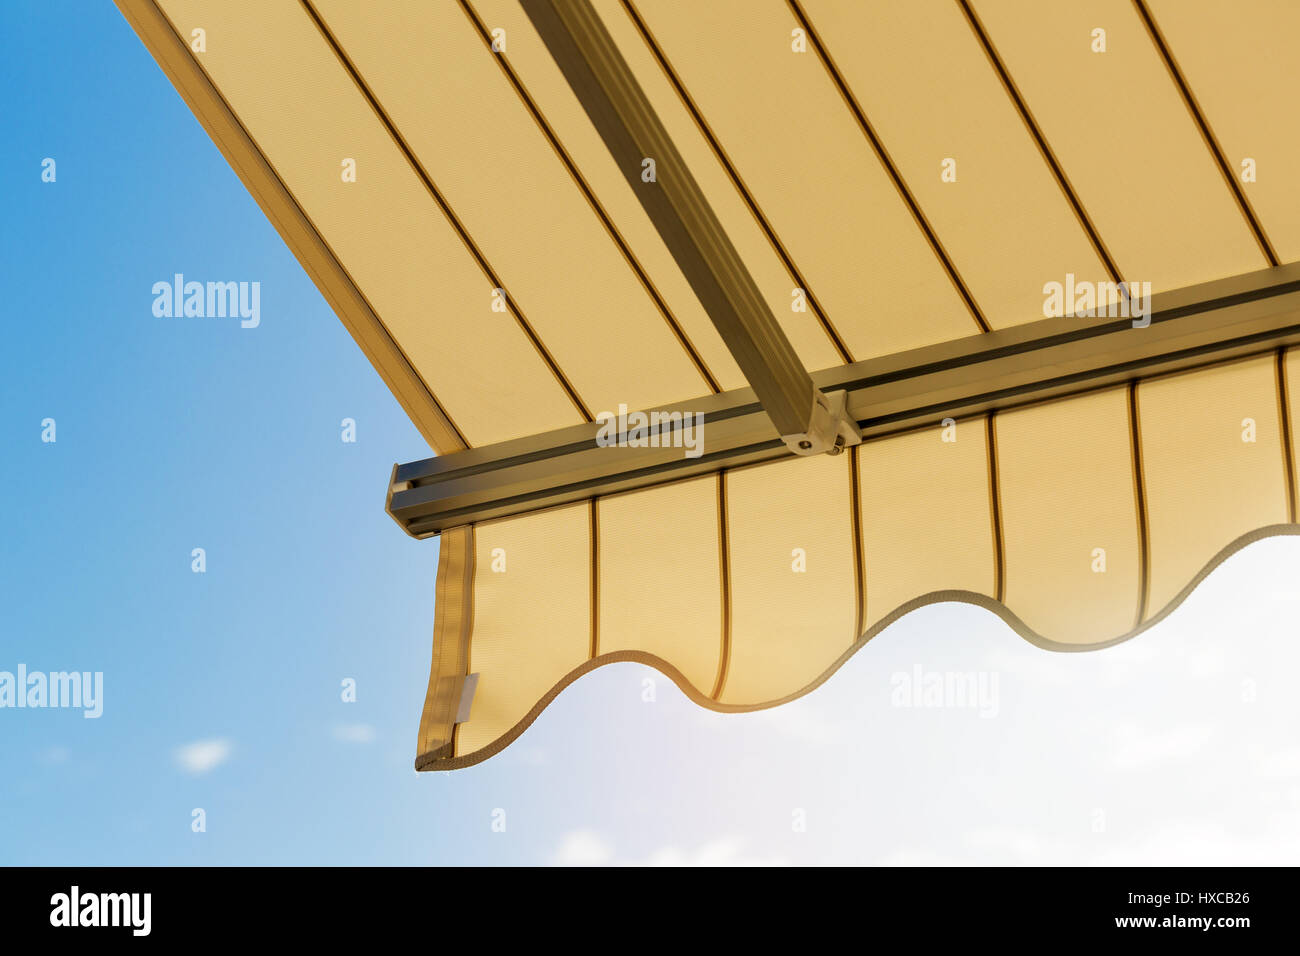 sun protection - awning against blue sky Stock Photo